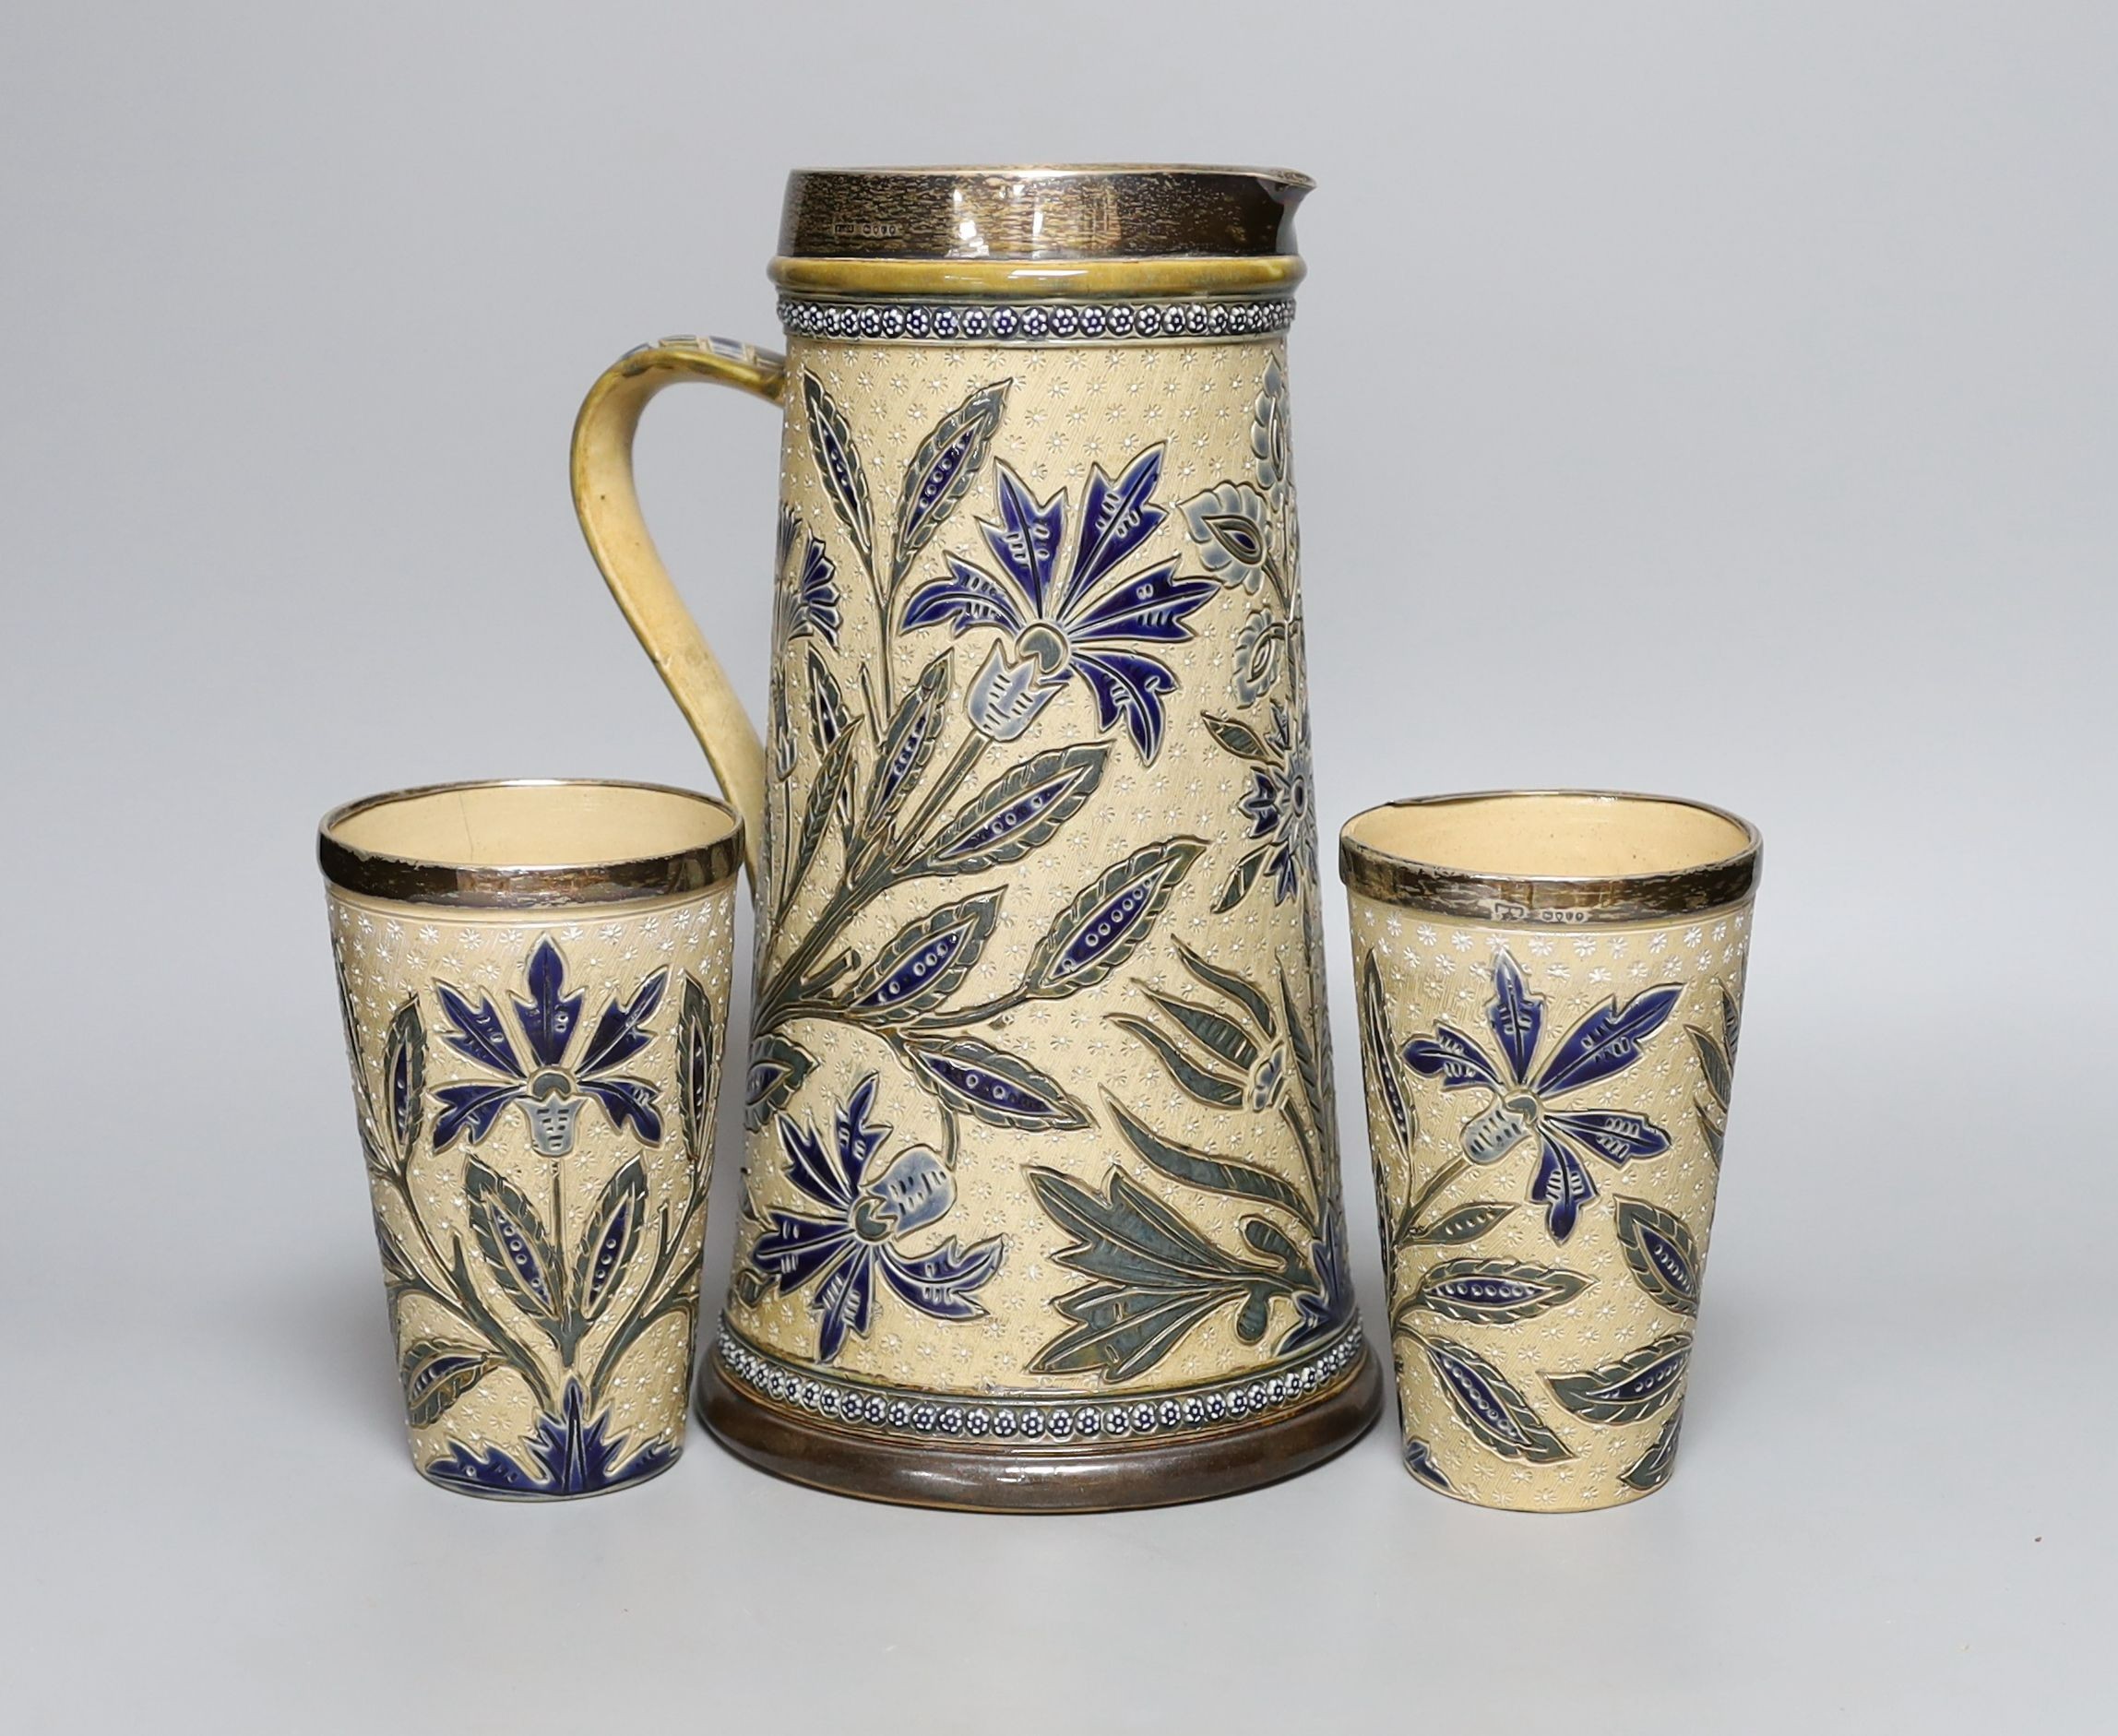 A silver mounted Doulton Lambeth jug by Louisa J Davis, 26.5cm tall, and a pair of matching beakers